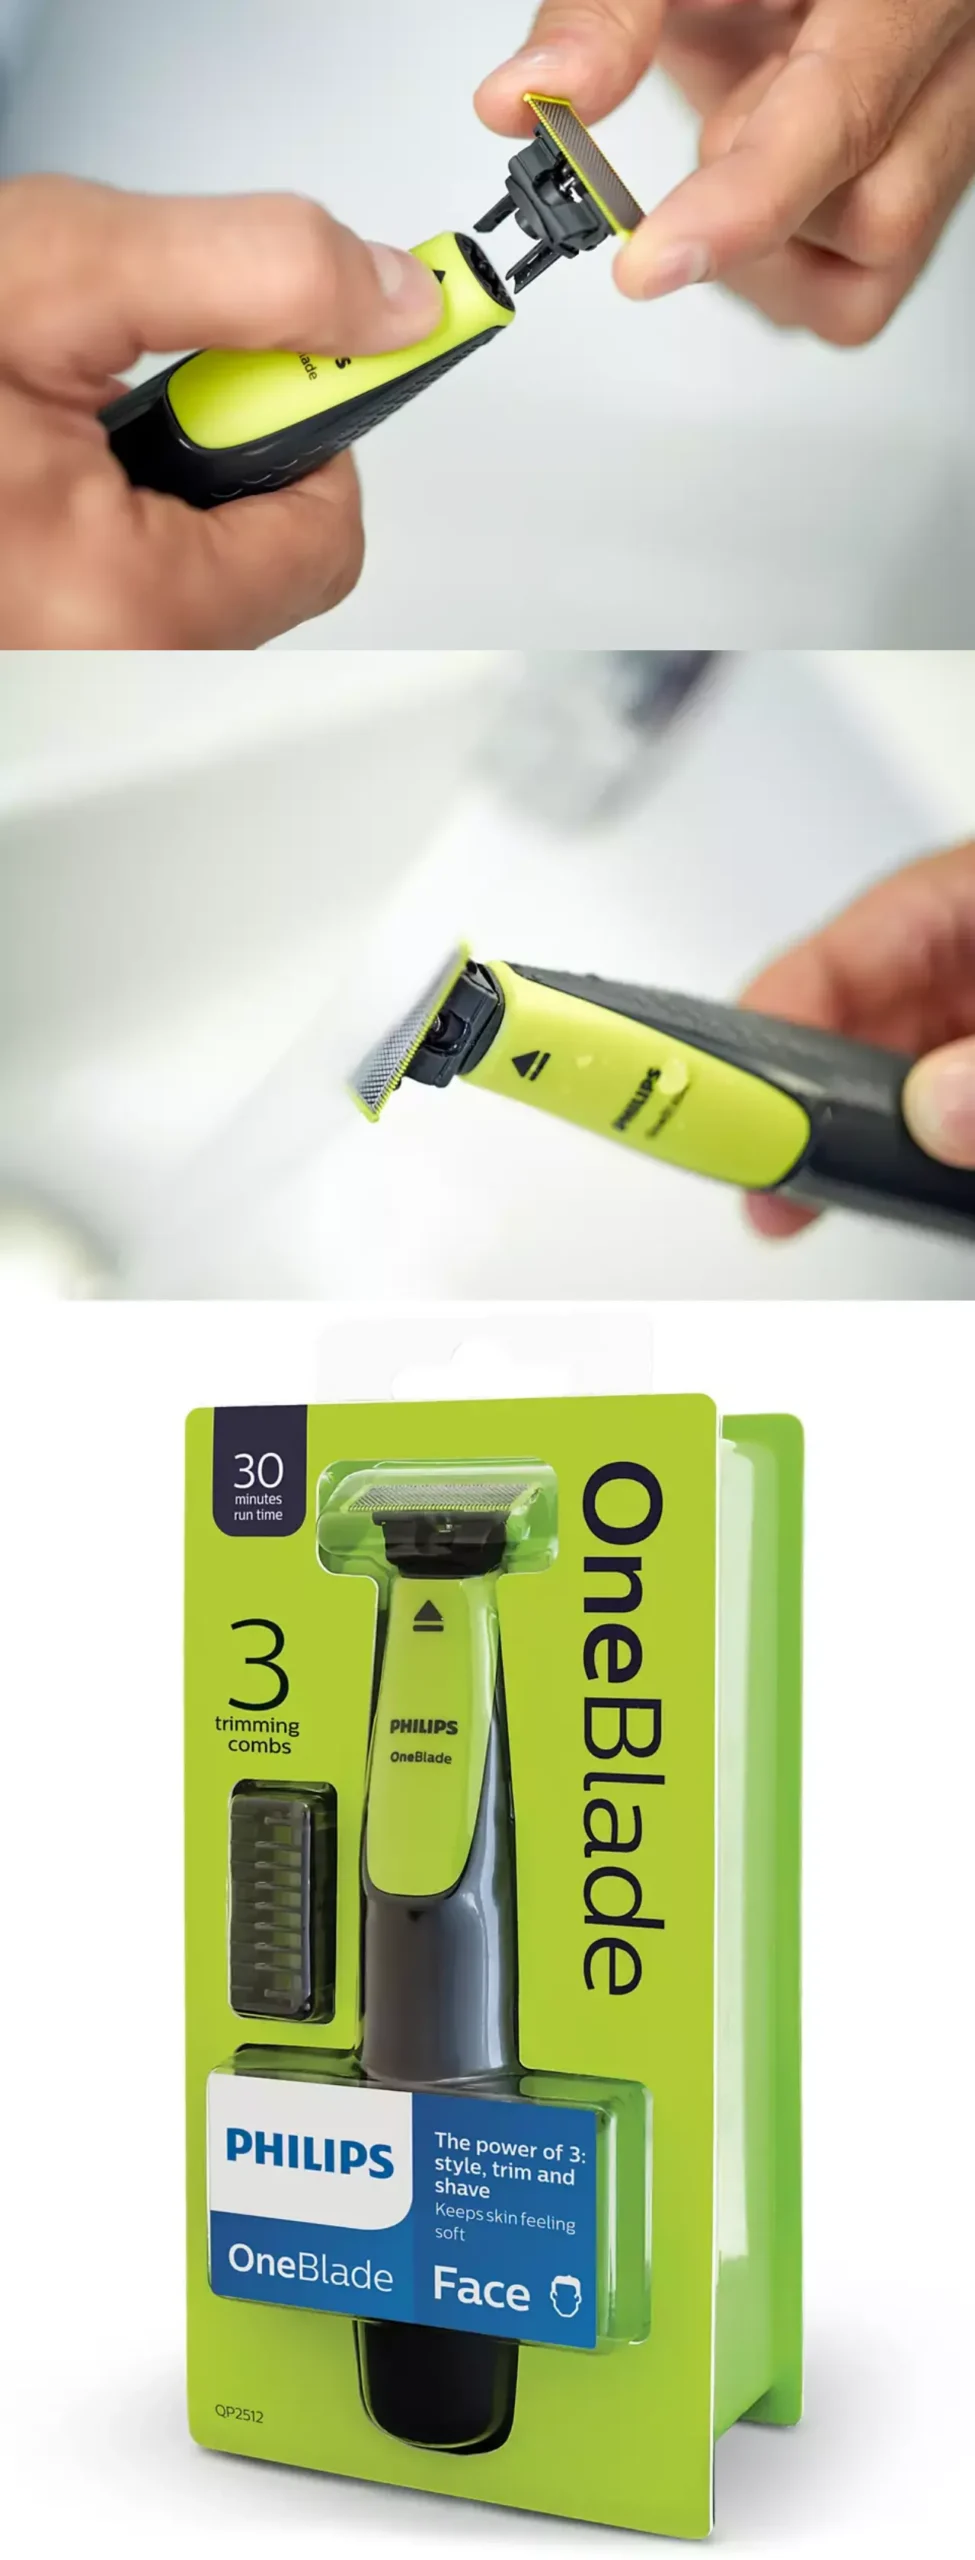 Philips QP2512/10 OneBlade Face, Beard Trimmer - Best Price